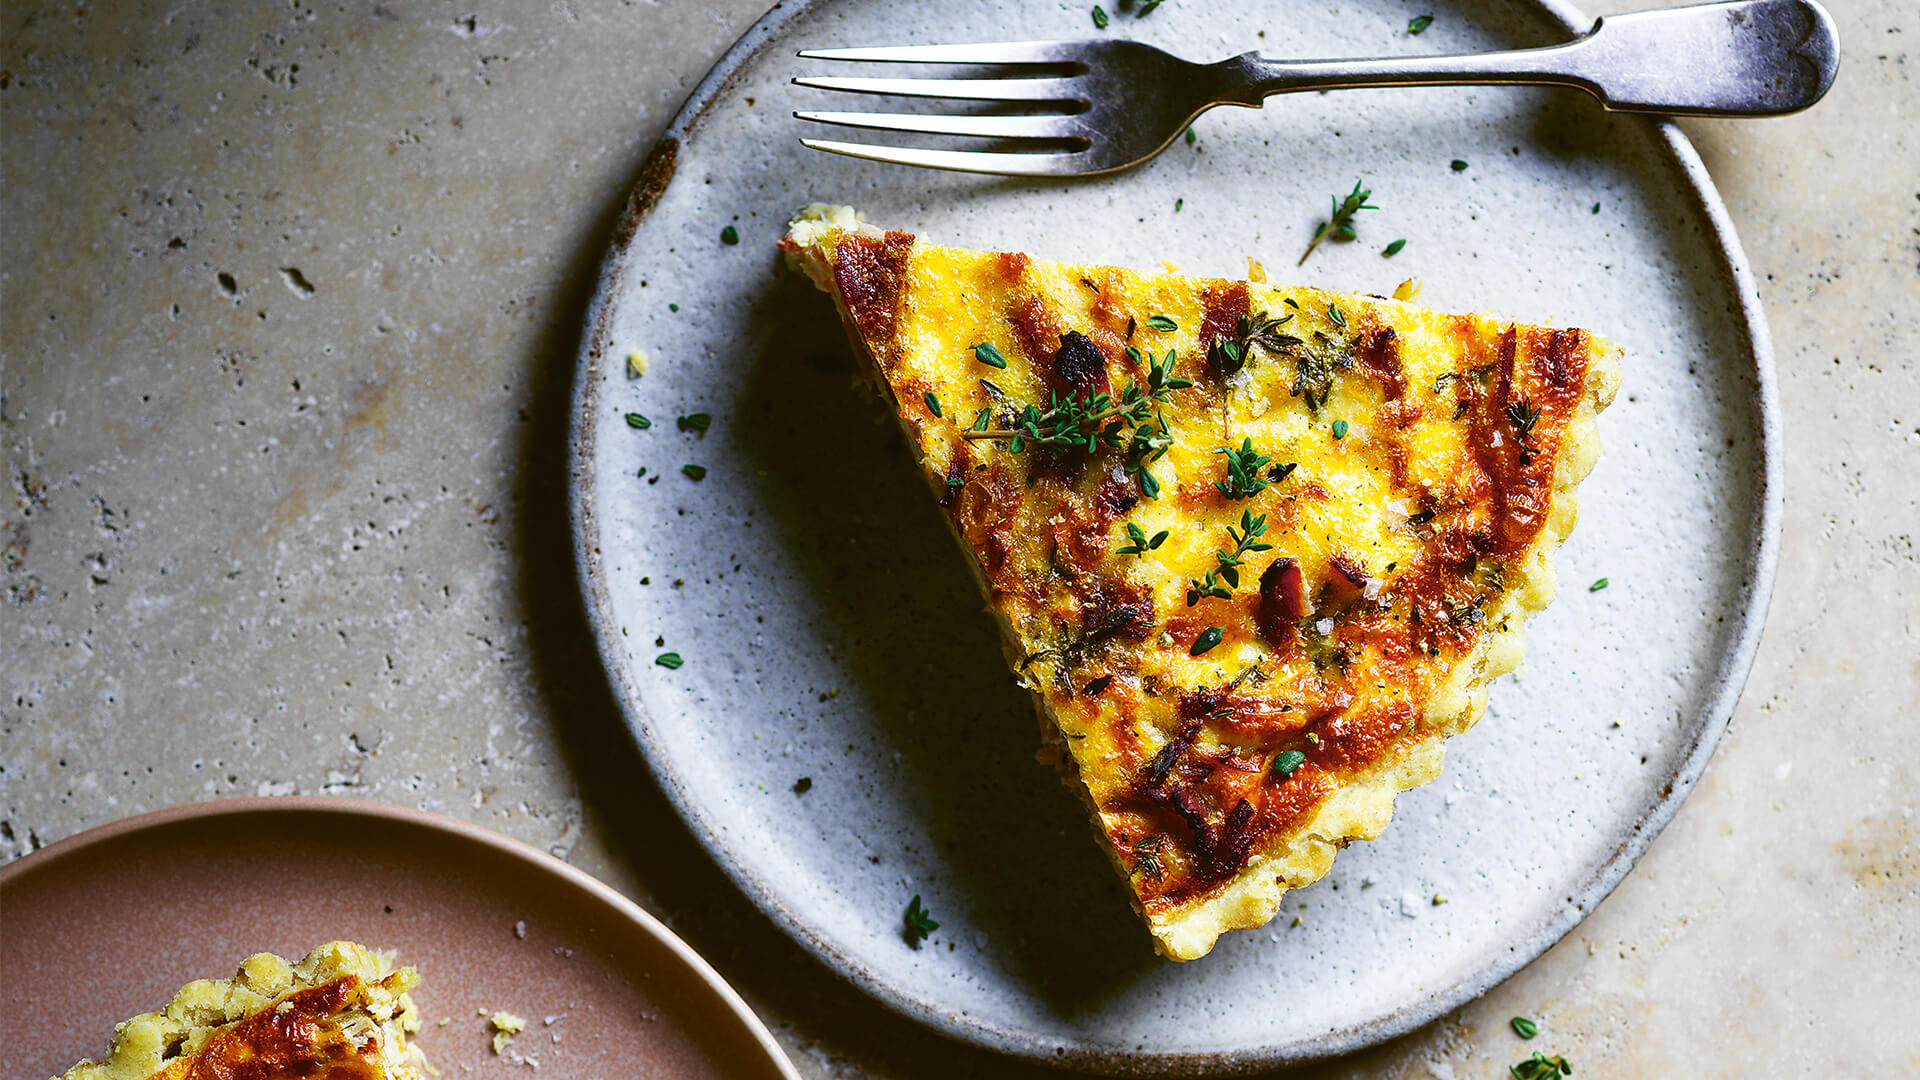 gluten-free bacon, cheddar and thyme quiche by Cherie Lyden of Wholegreen Bakery